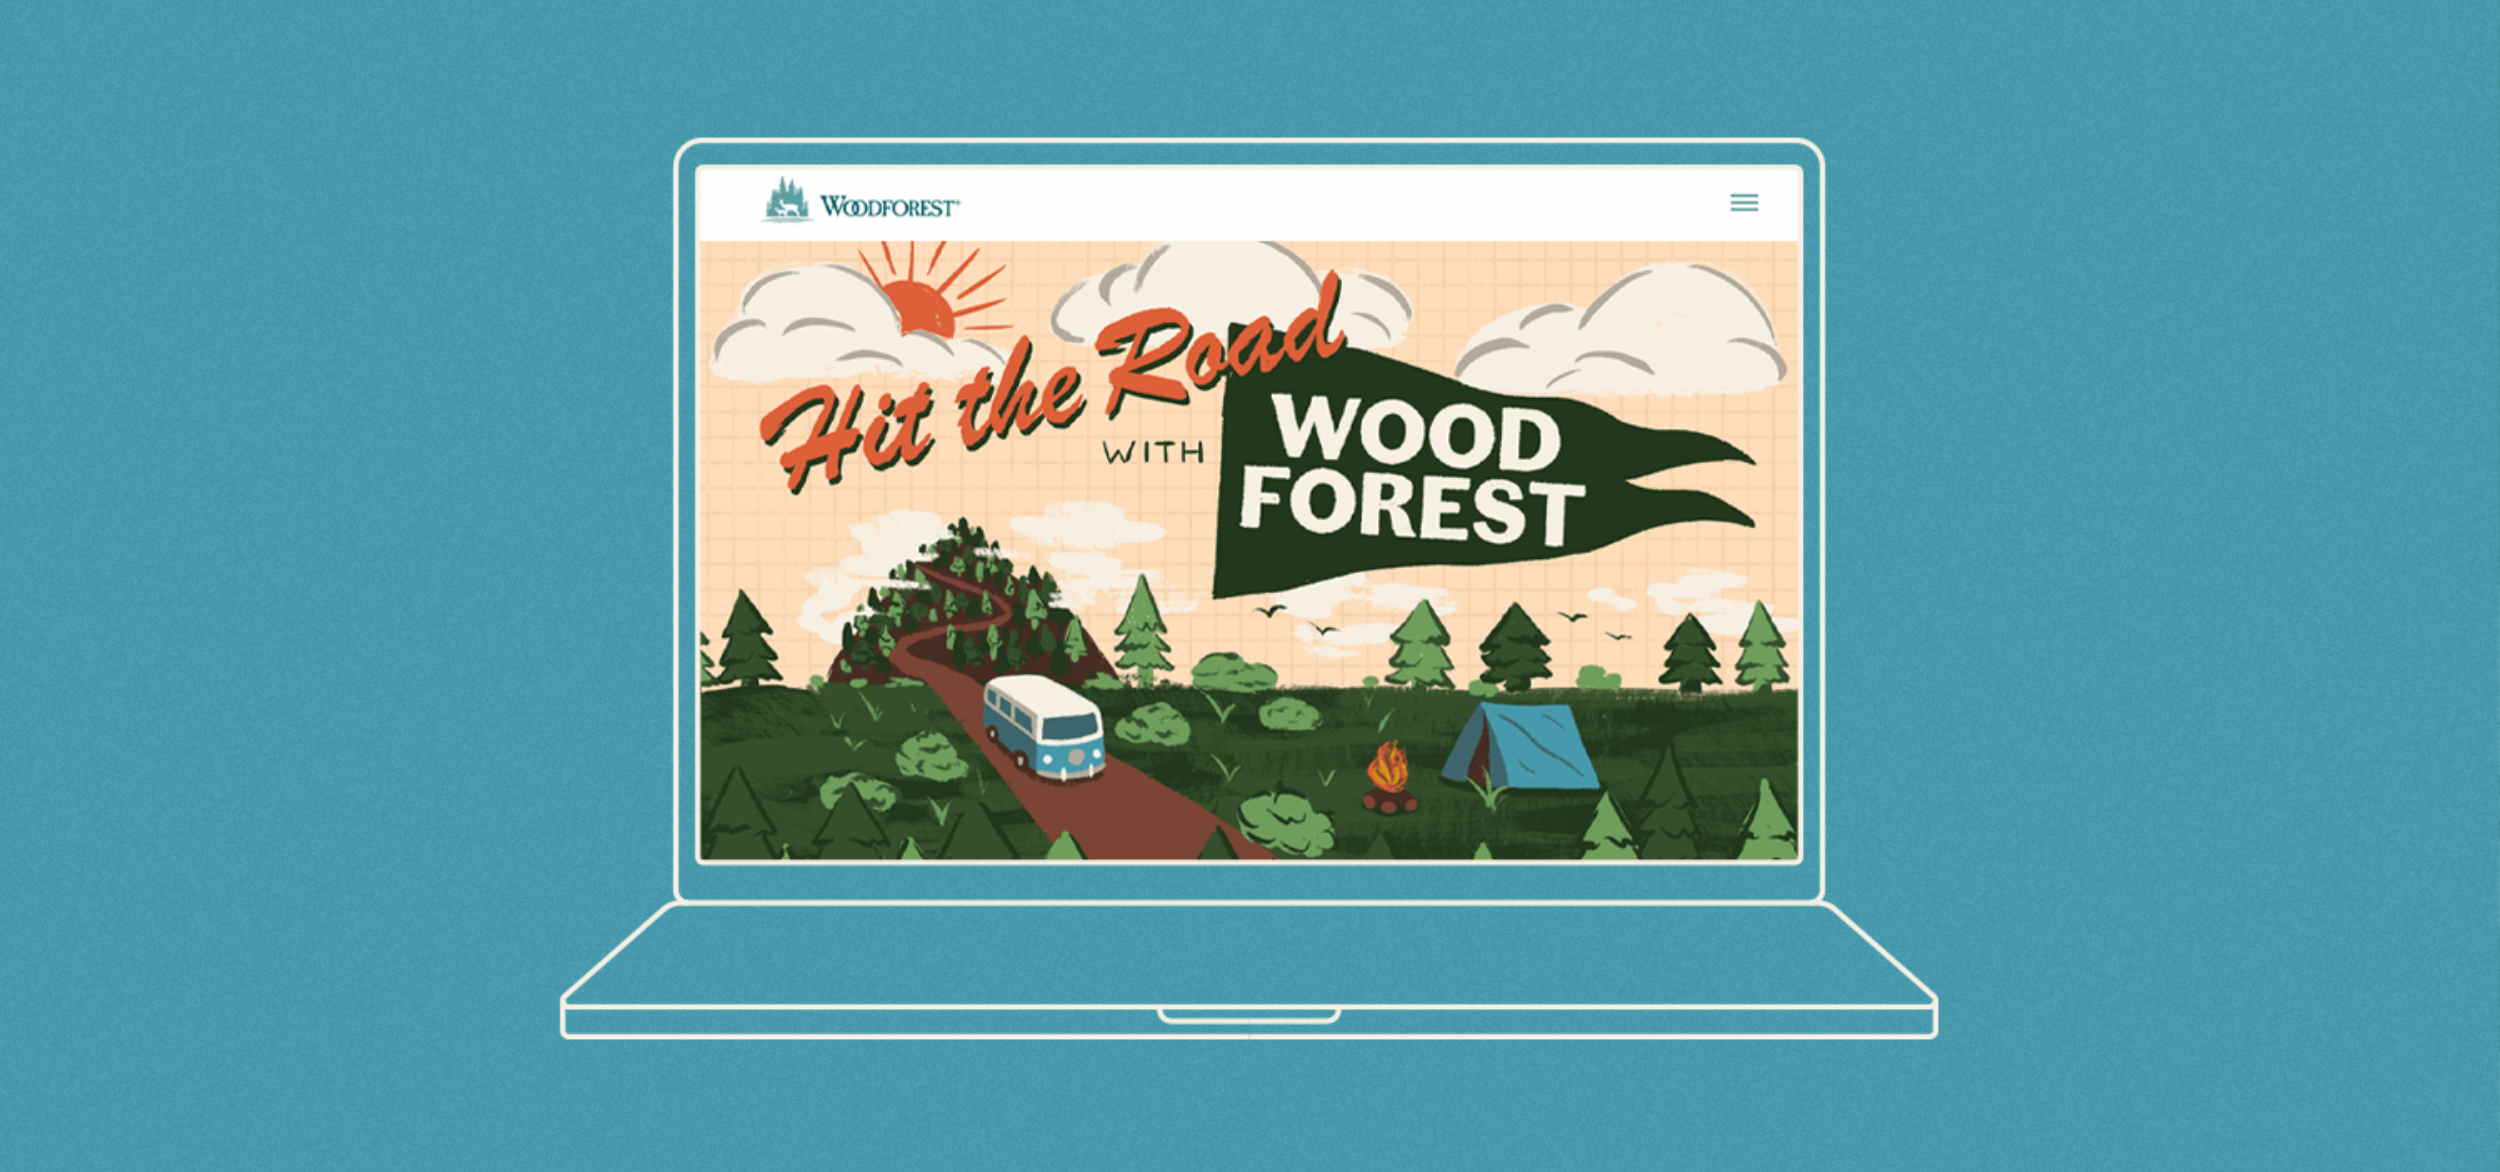 Hit the Road landing page header created by ST8MNT for a Woodforest Fall campaign